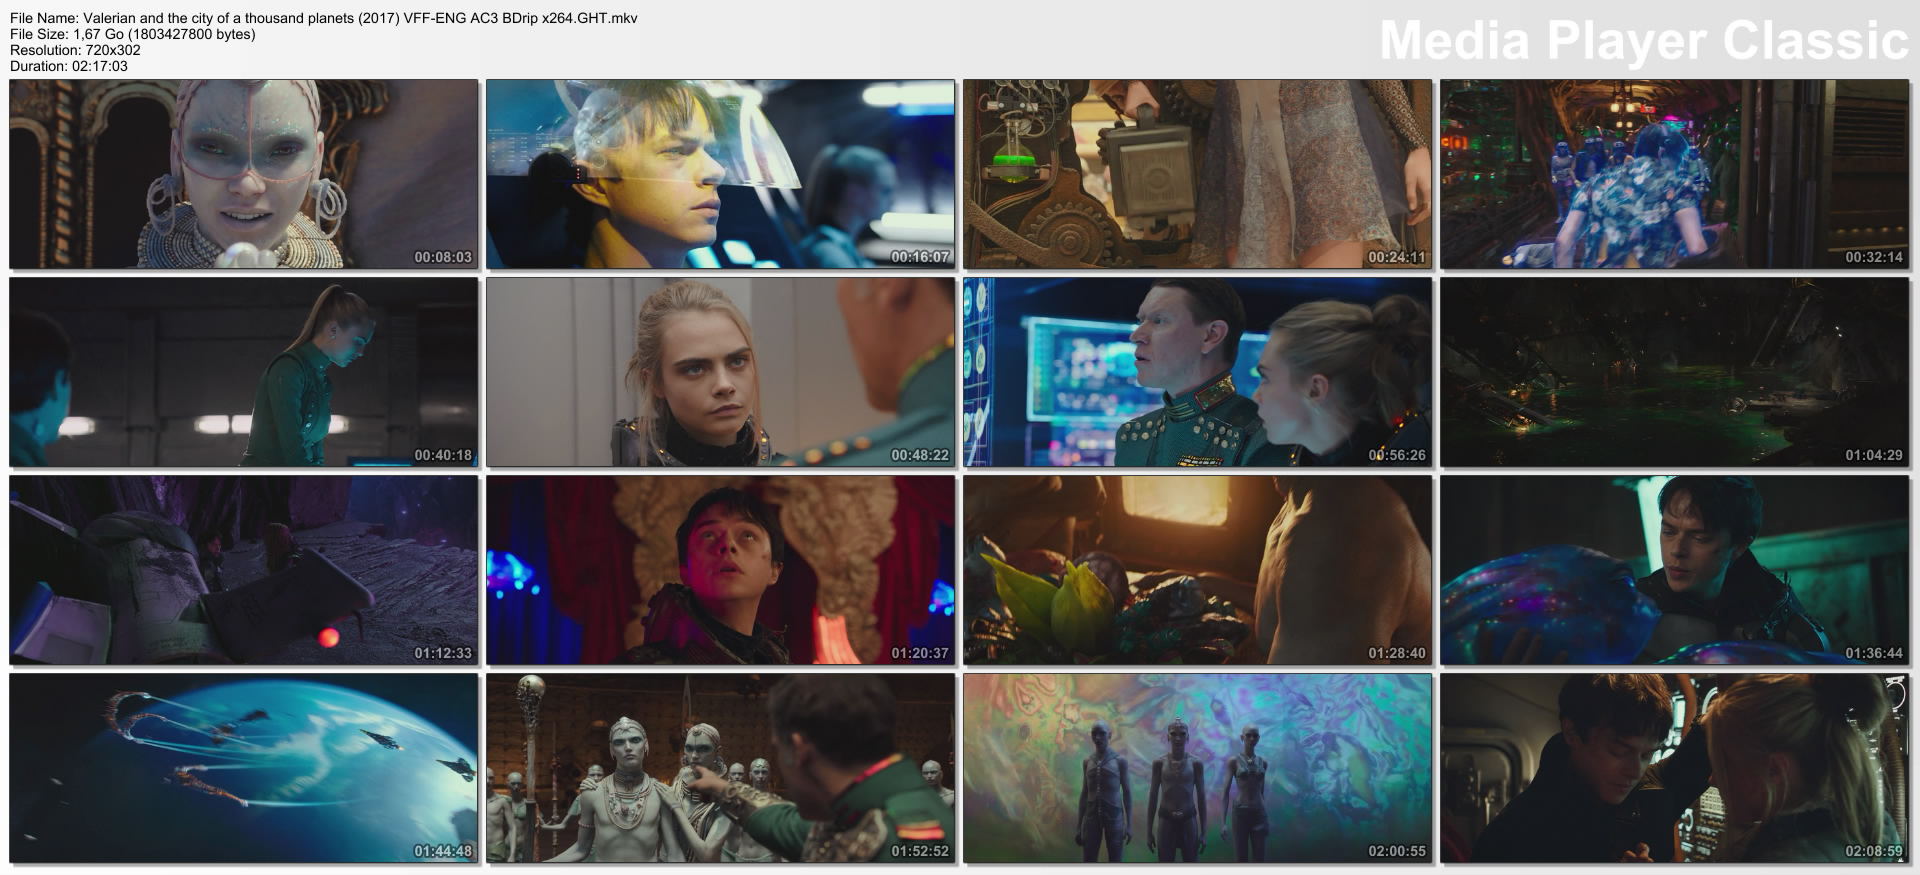 Valerian and the city of a thousand planets (2017) VFF-ENG AC3 BDrip x264.GHT